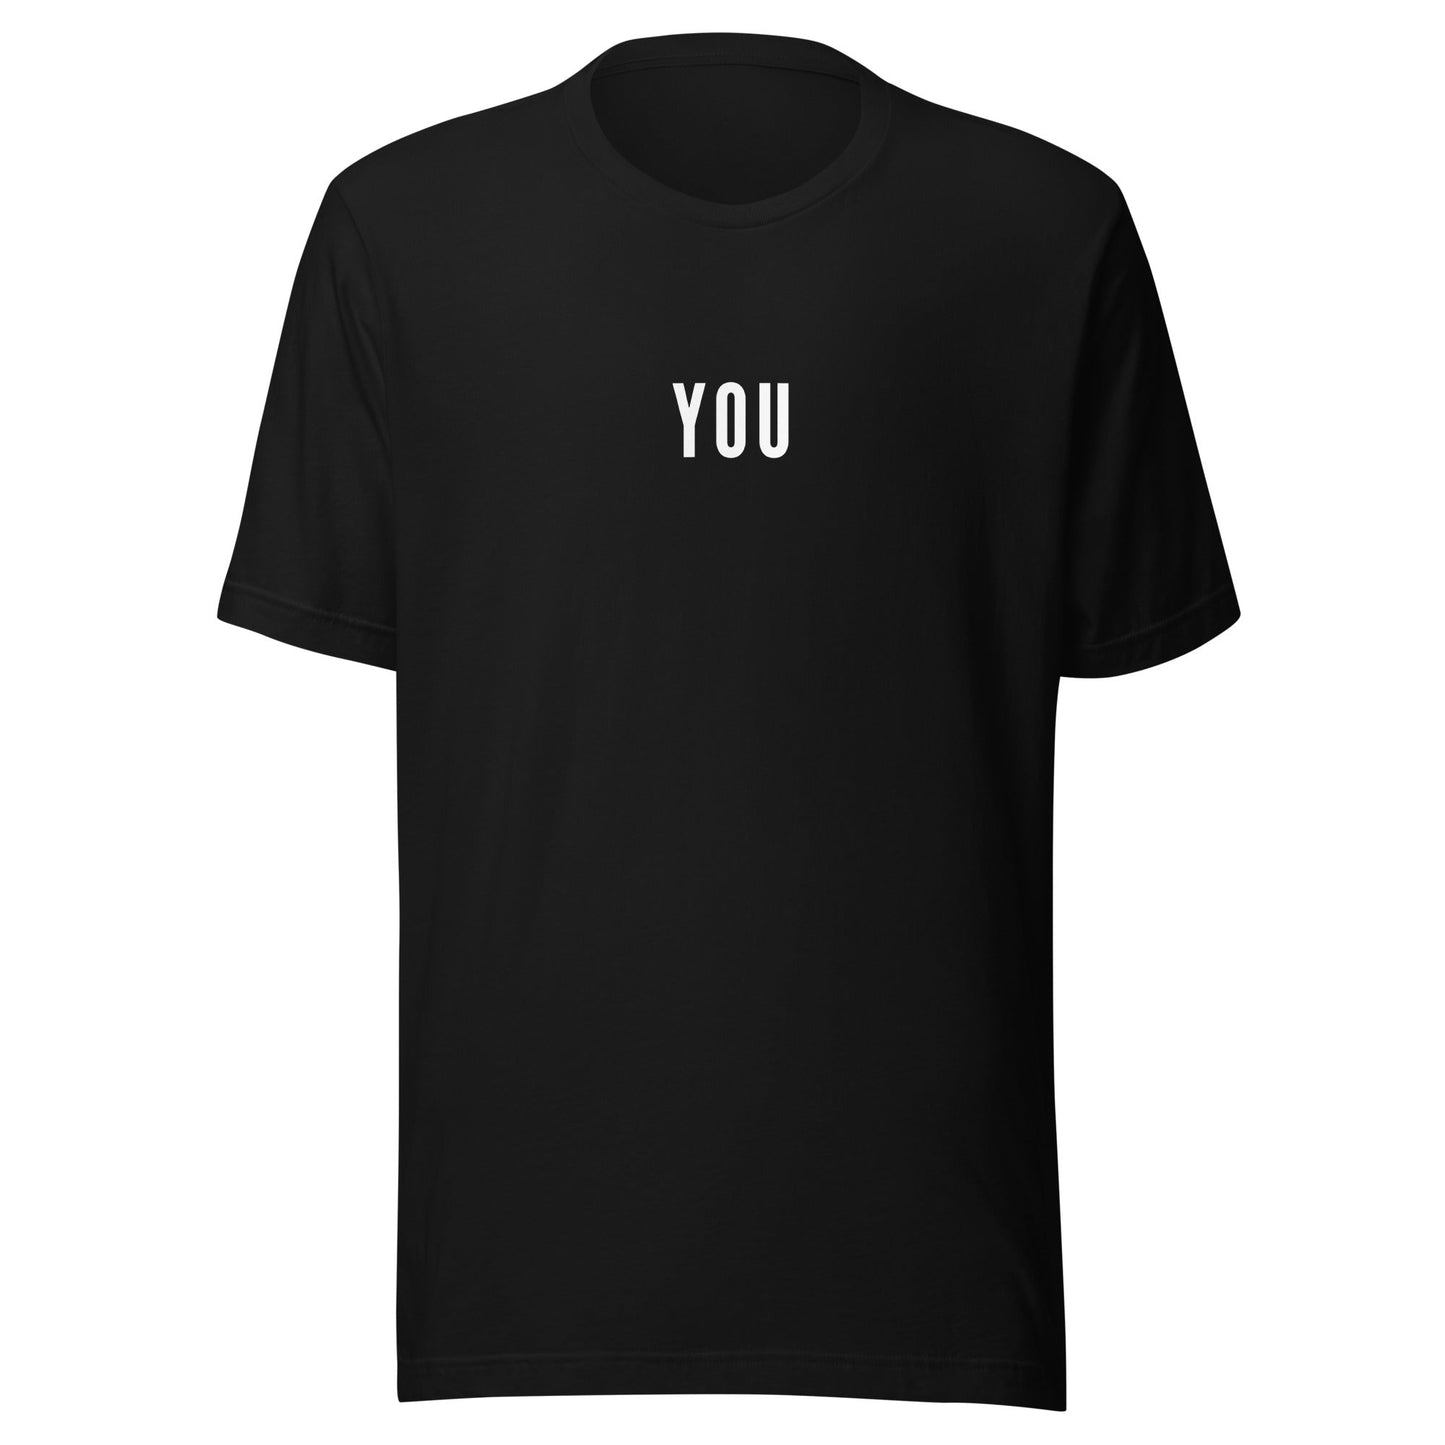 All I want is you - Unisex t-shirt - lilaloop - T-shirt